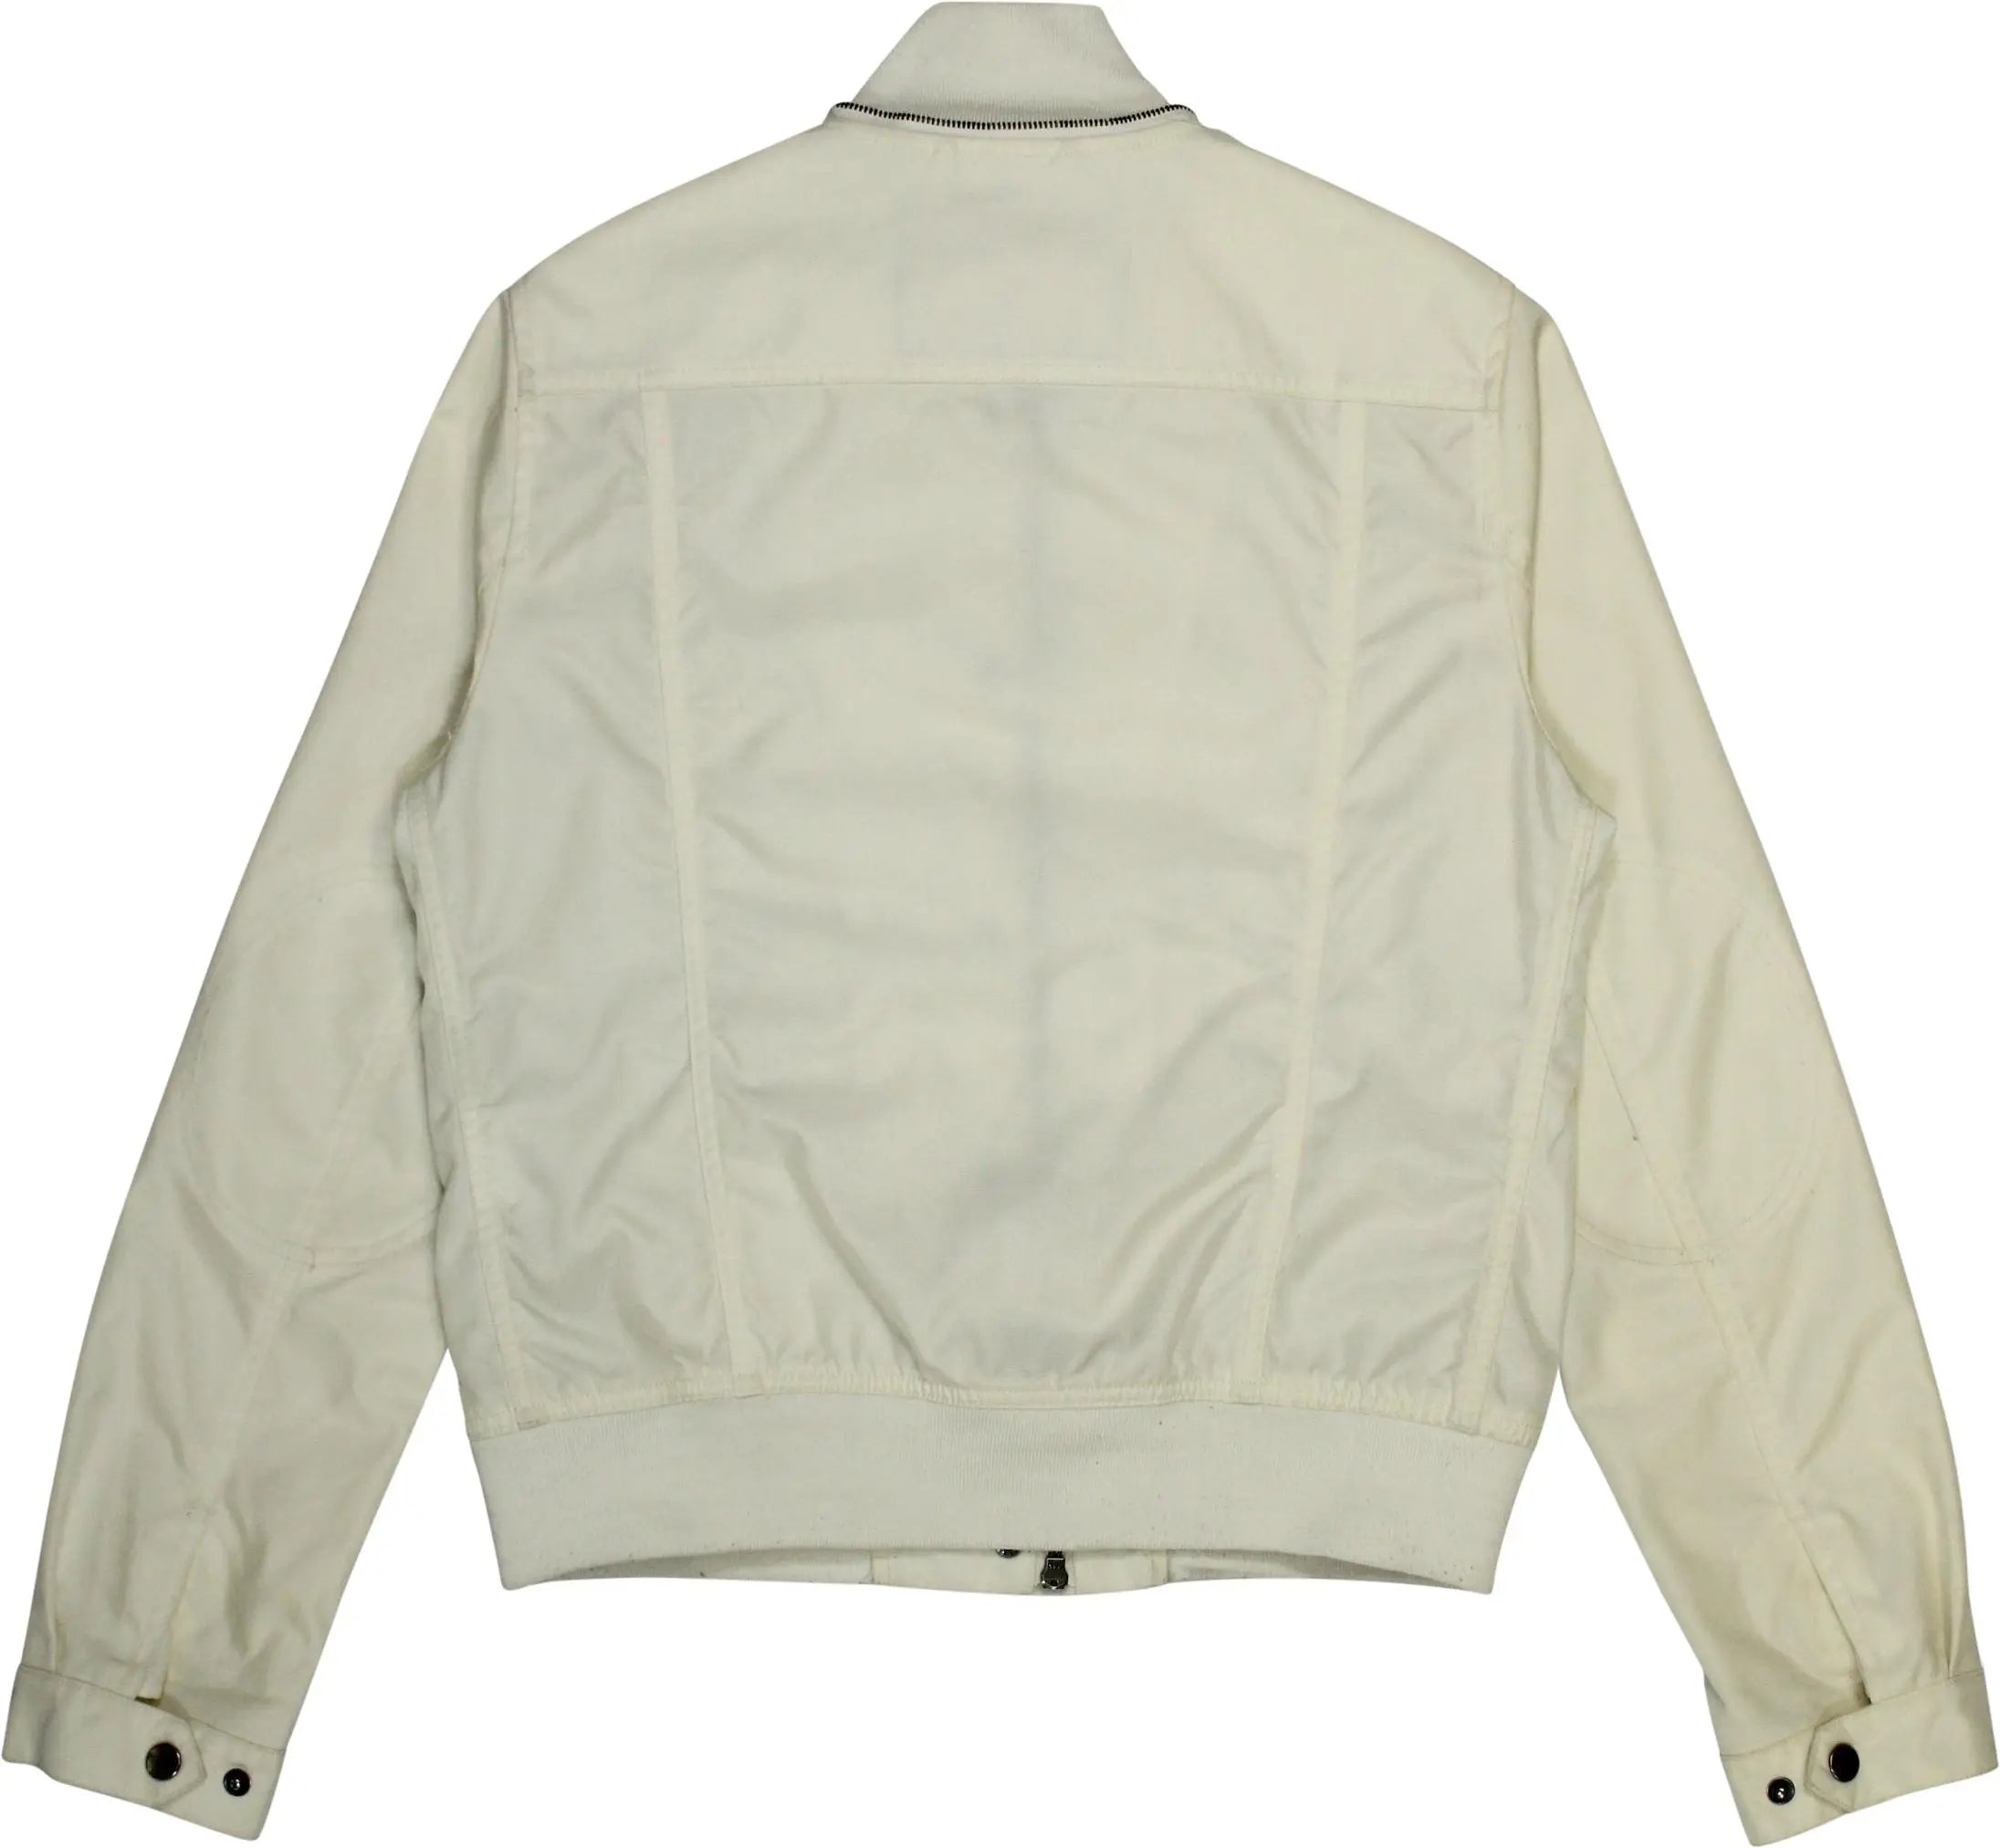 Woolrich - White Jacket by Woolrich- ThriftTale.com - Vintage and second handclothing